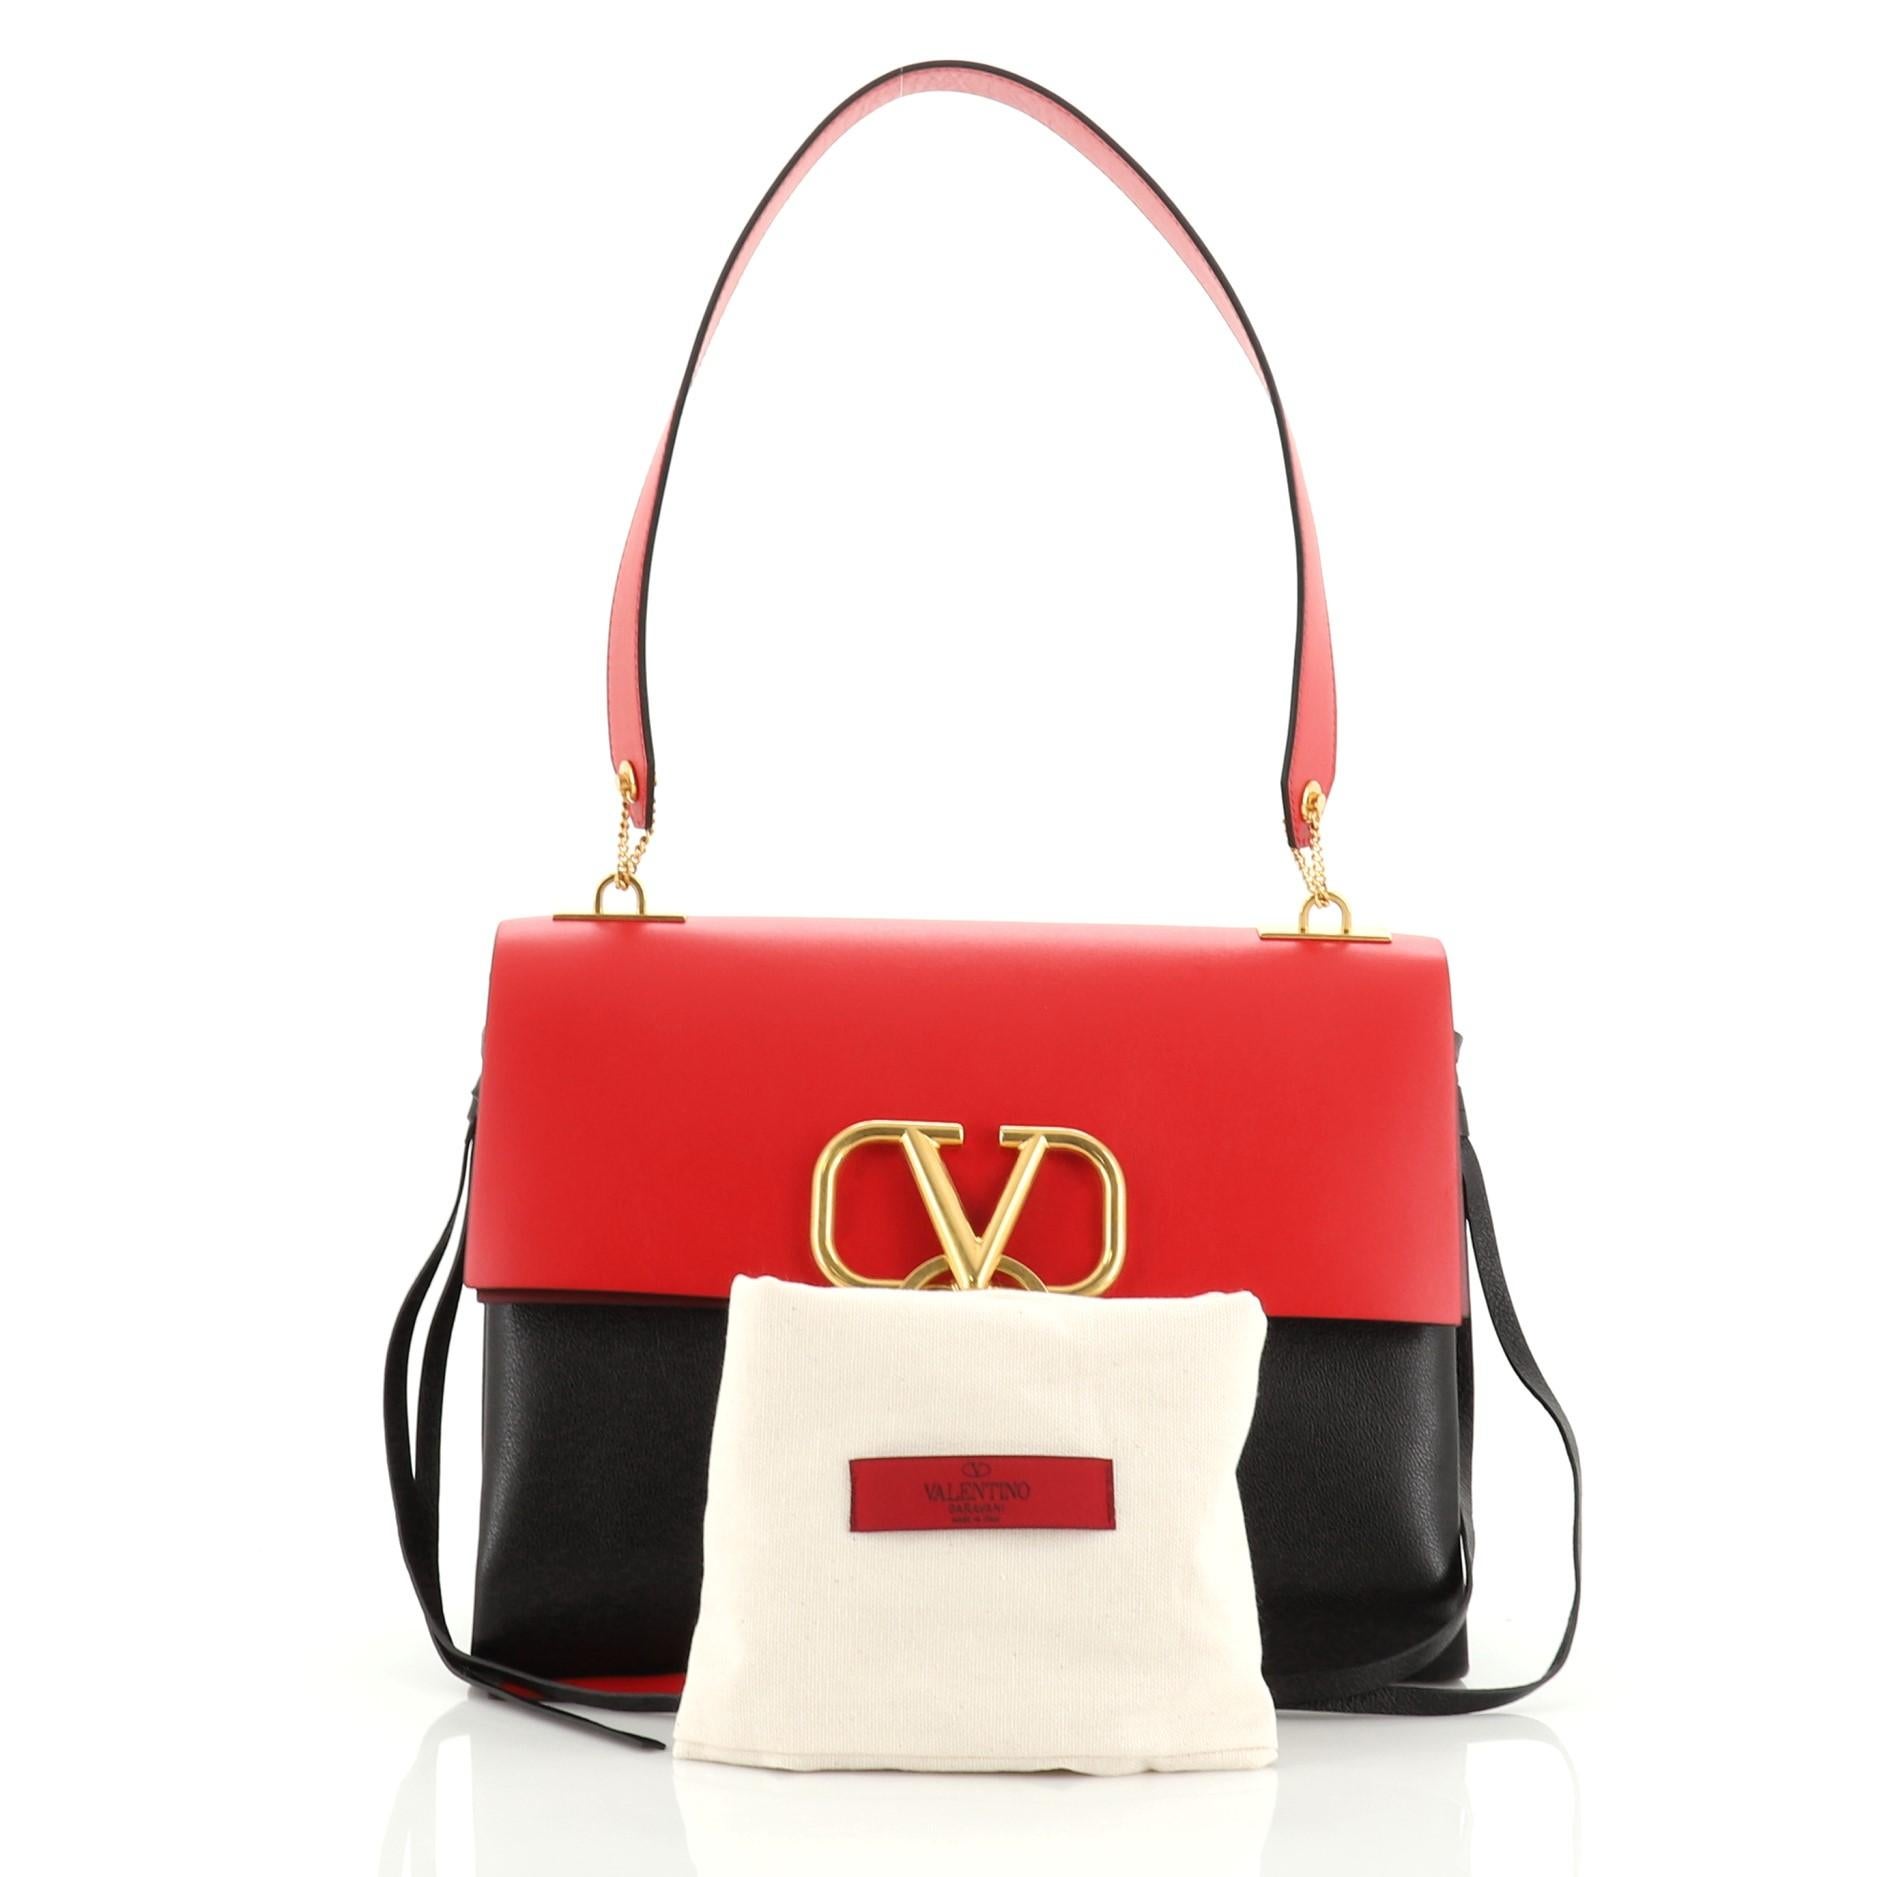 This Valentino V-Ring Shoulder Bag Leather Medium, crafted from black, red and multicolor leather, features leather shoulder strap, metal logo adorned with ring and tie, and gold-tone hardware. Its clip closure opens to a black and red leather